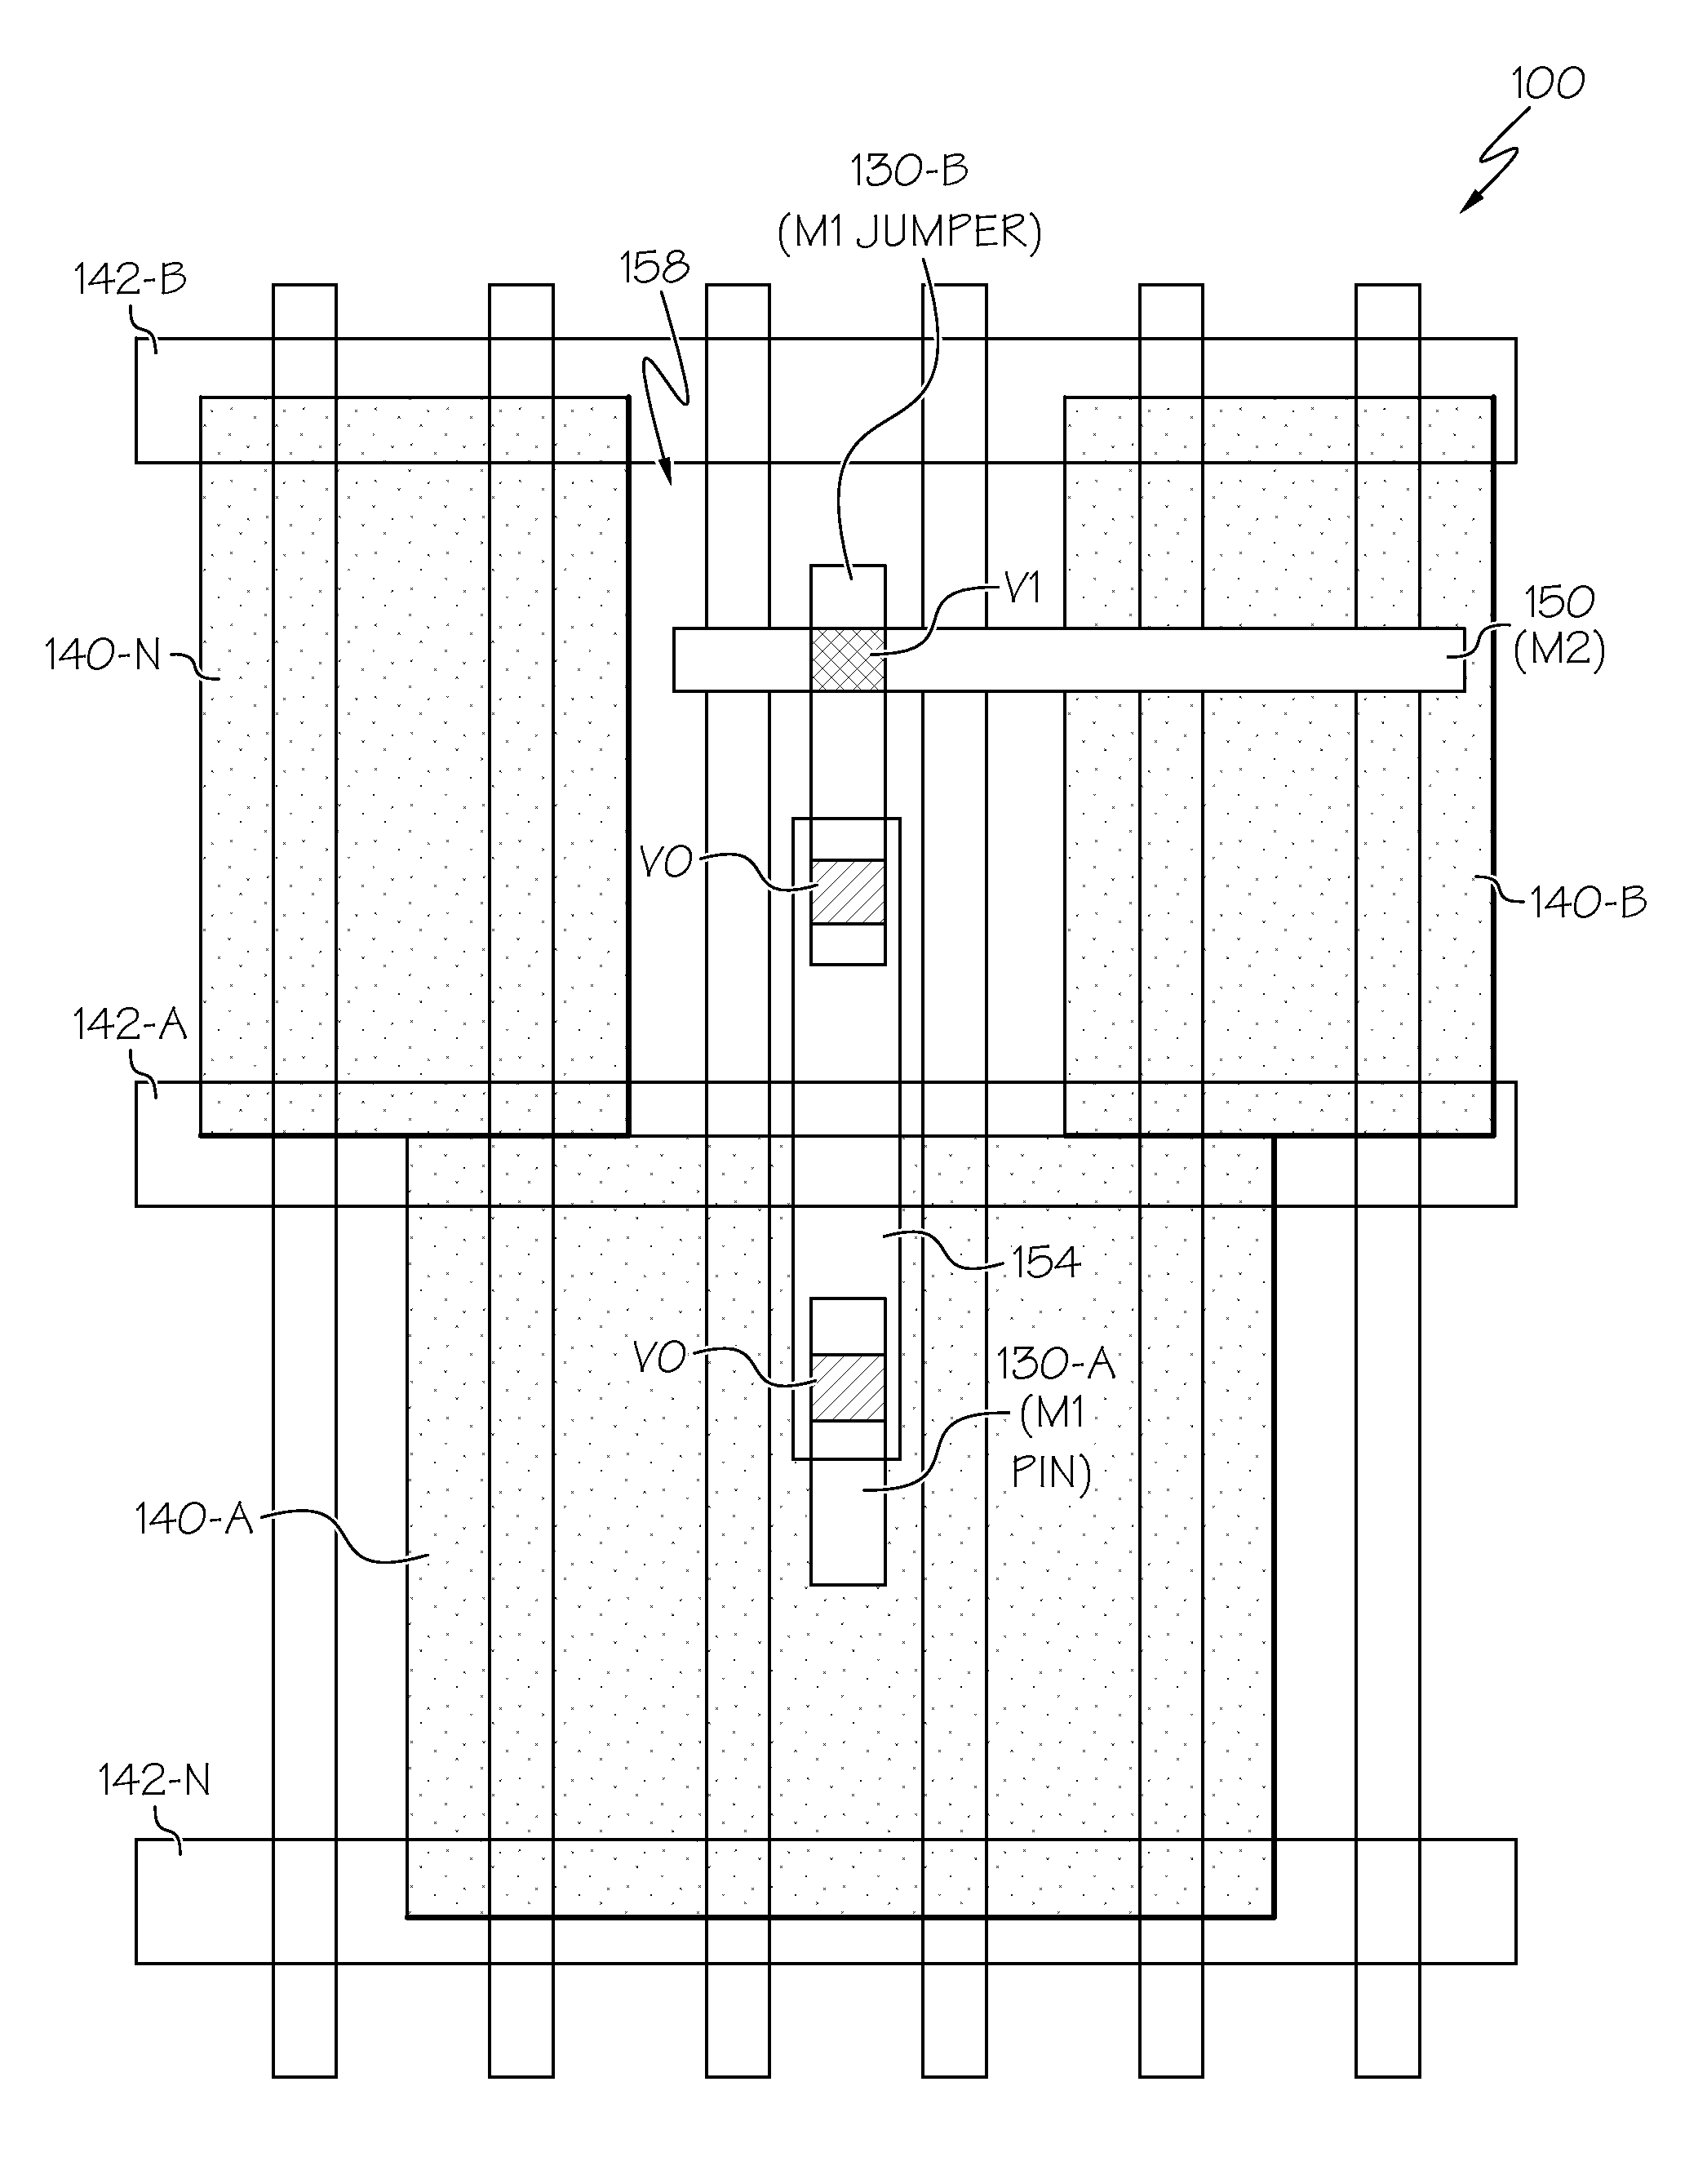 Standard cell connection for circuit routing